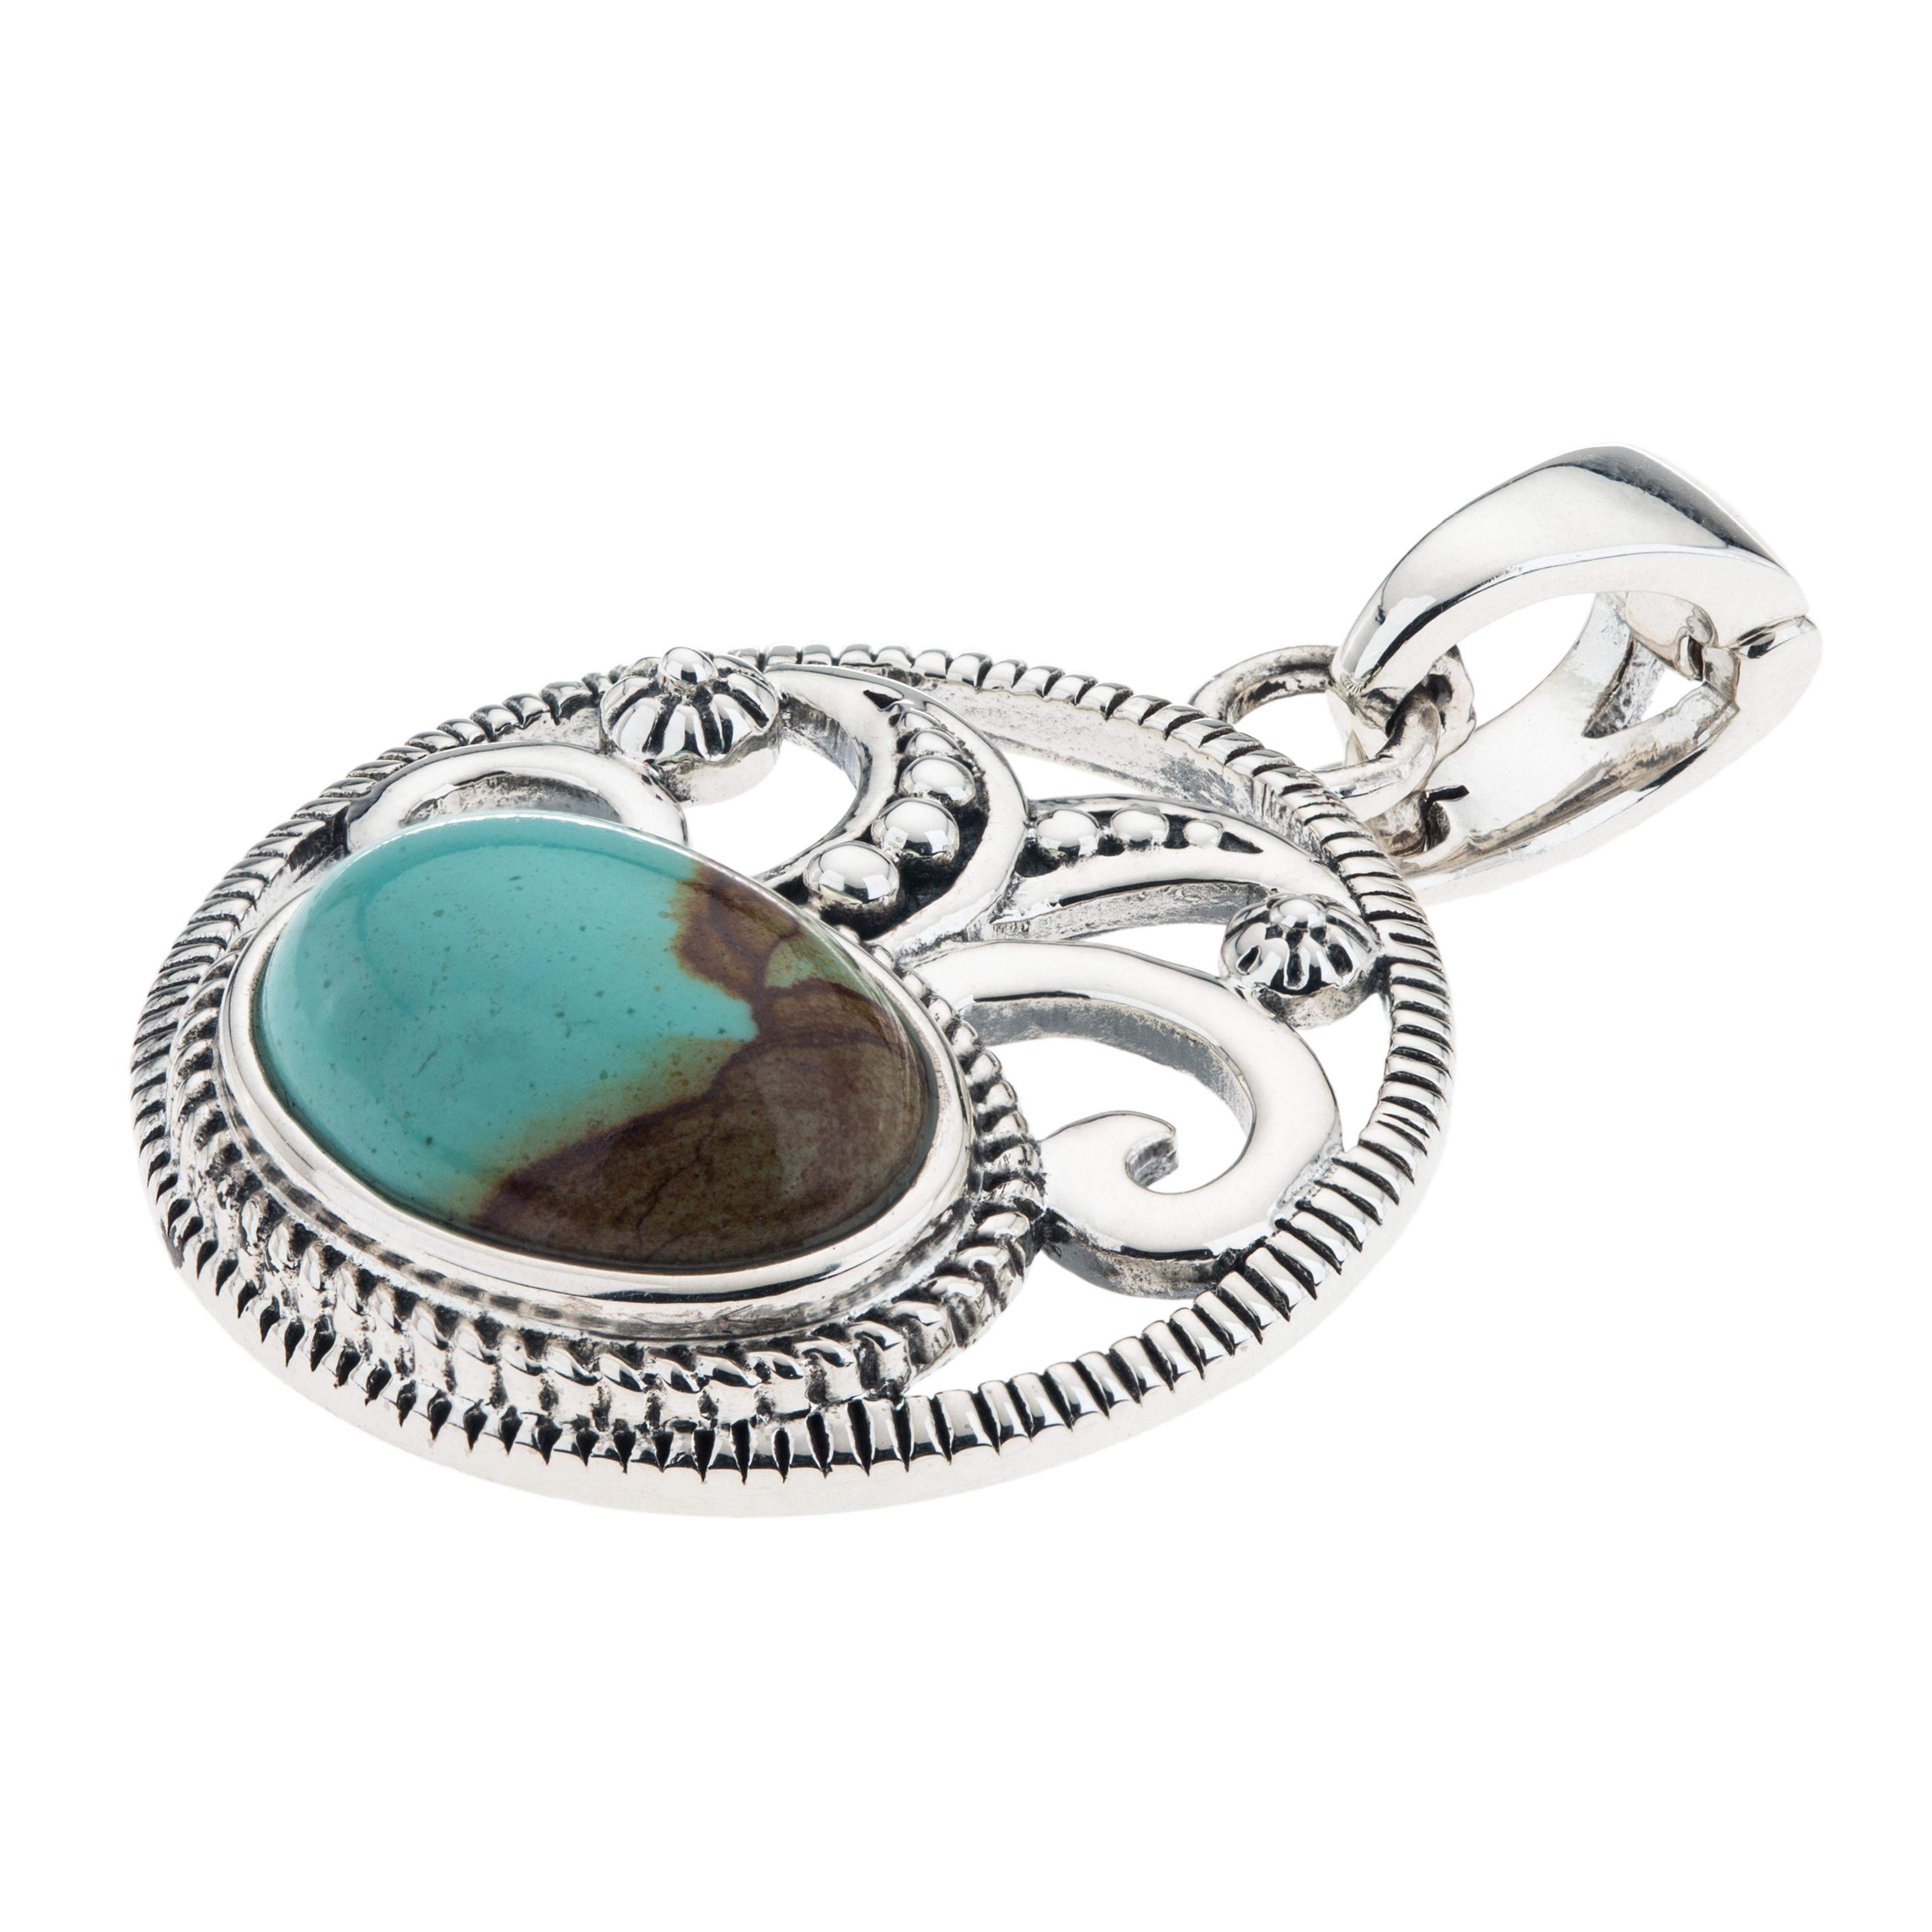 Silver 30x23mm Oval #8 Turquoise Pendant Necklace - Shop Thrifty Treasures